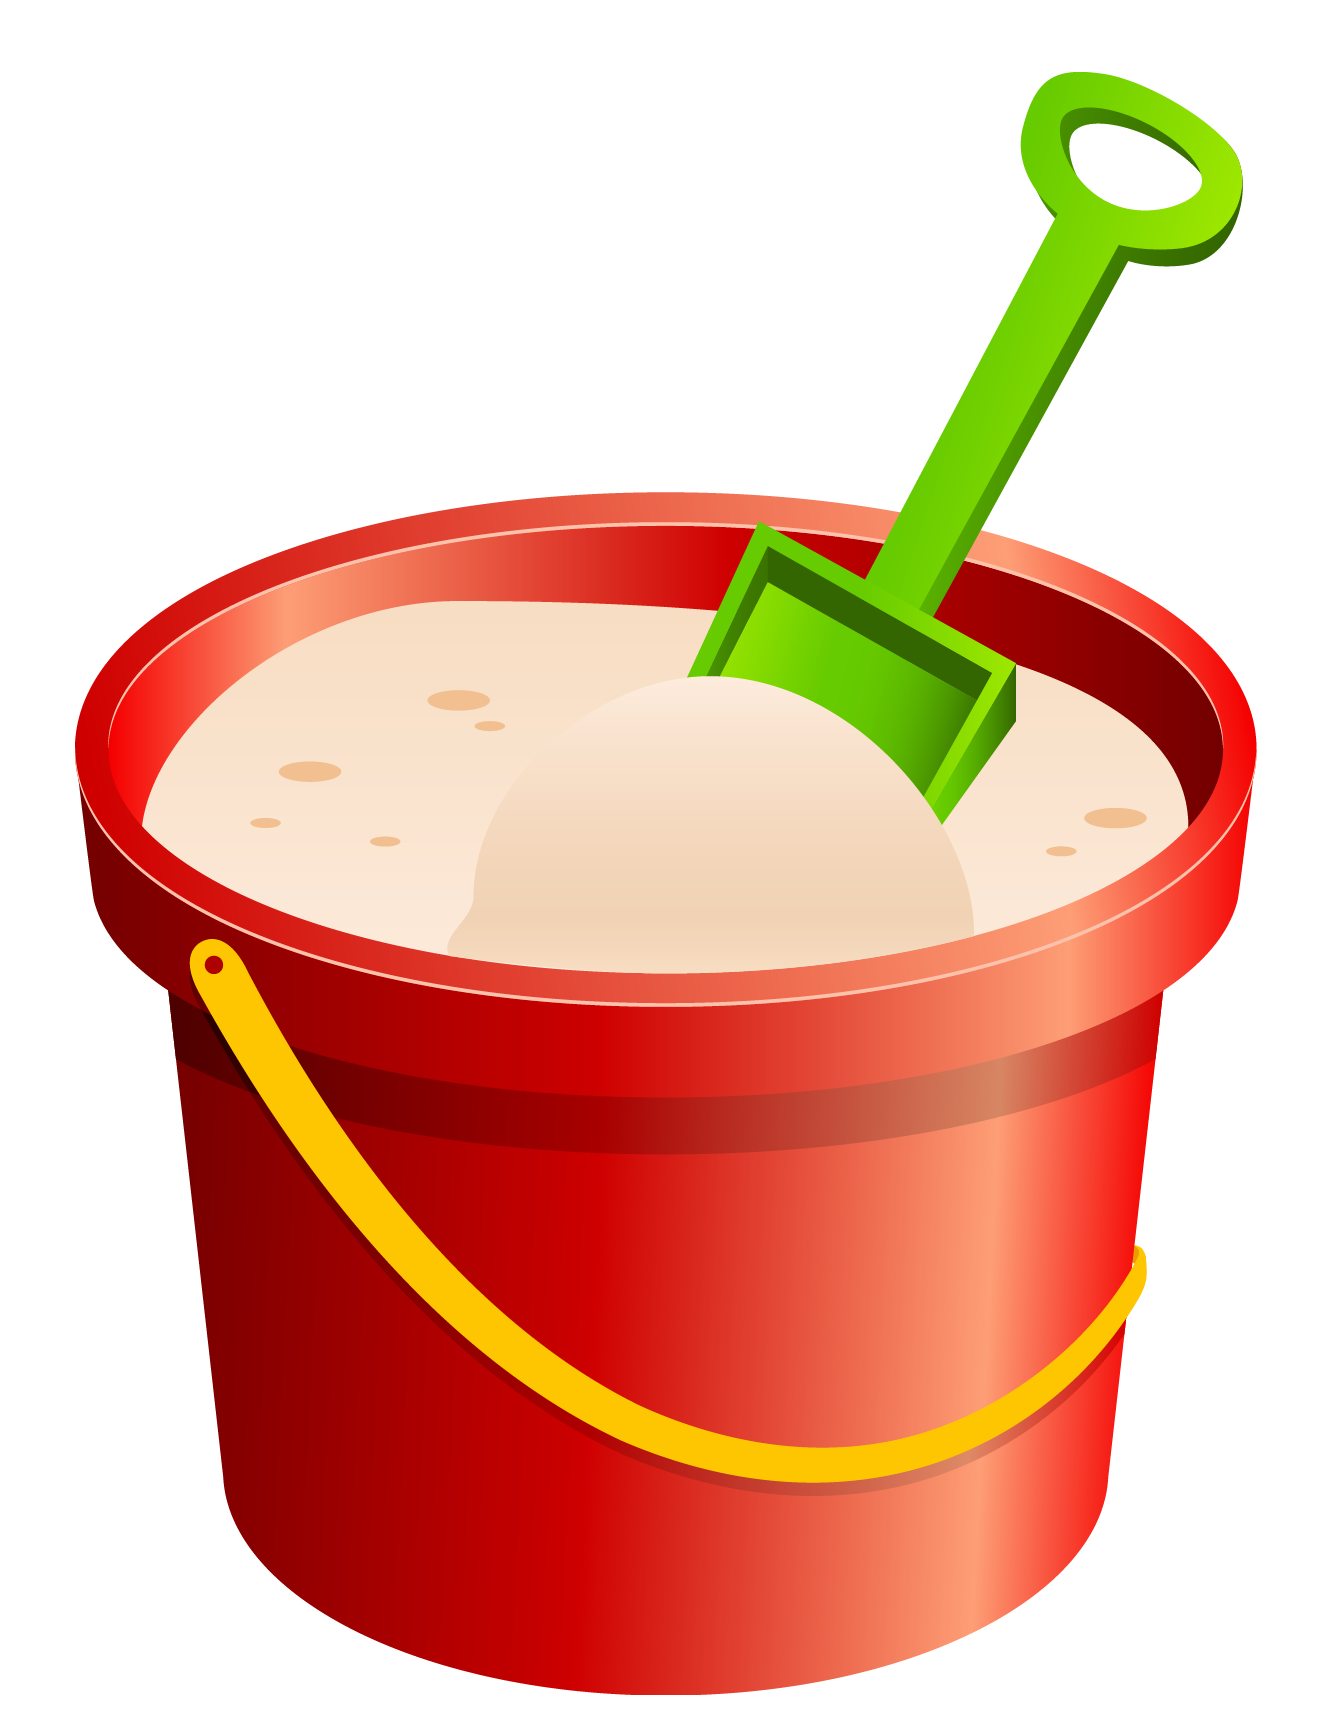 Red clipart pail. Sand bucket and green